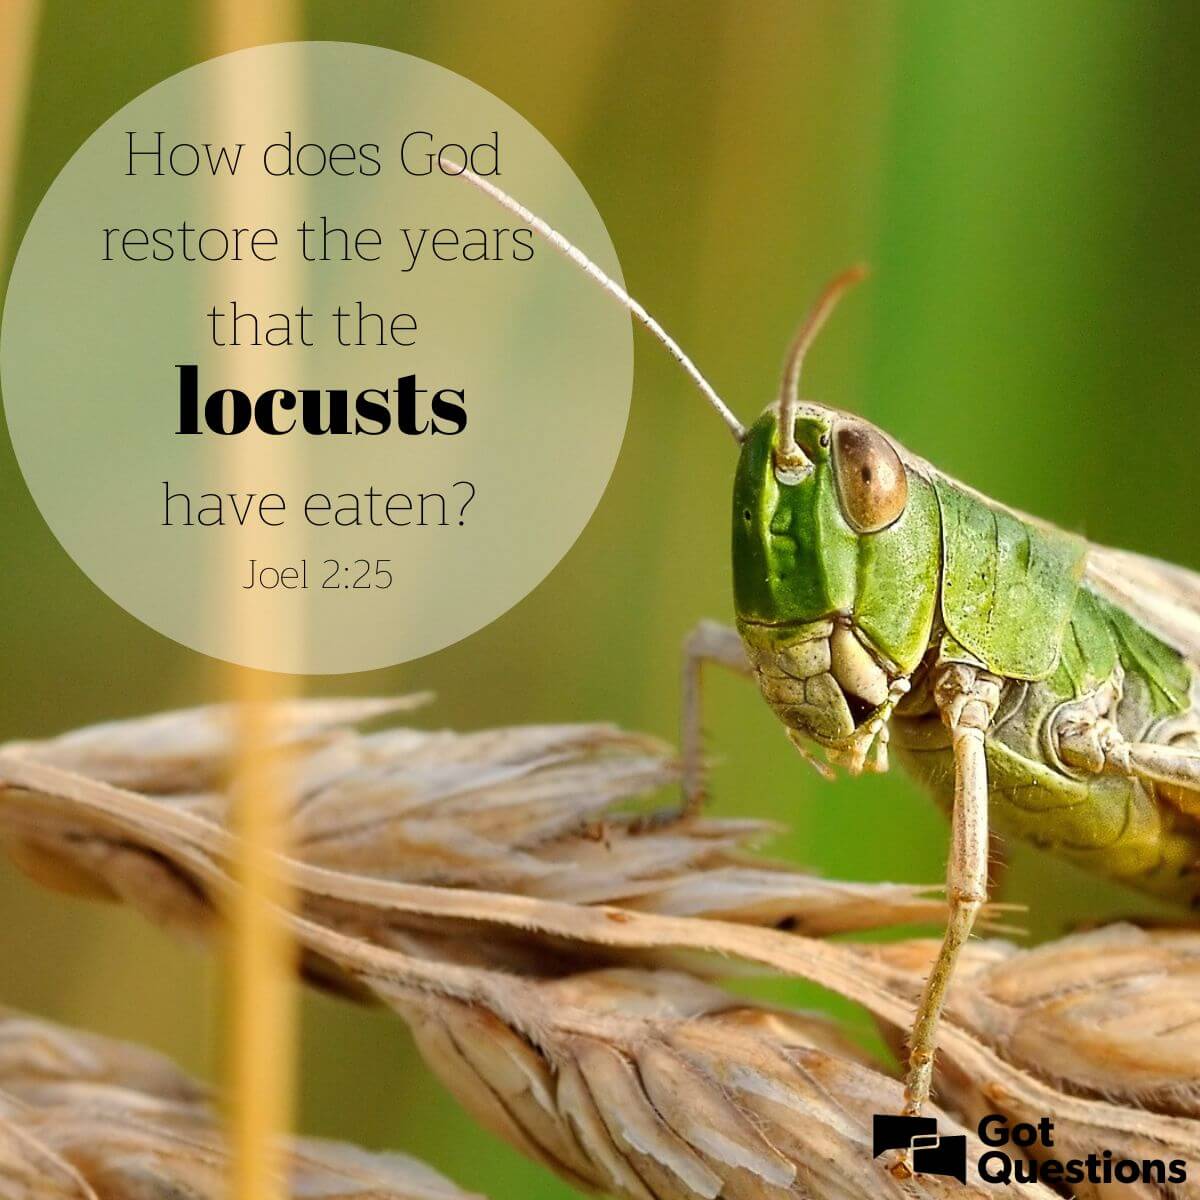 How Does God Restore The Years That The Locusts Have Eaten (Joel 2:25)? |  Gotquestions.org